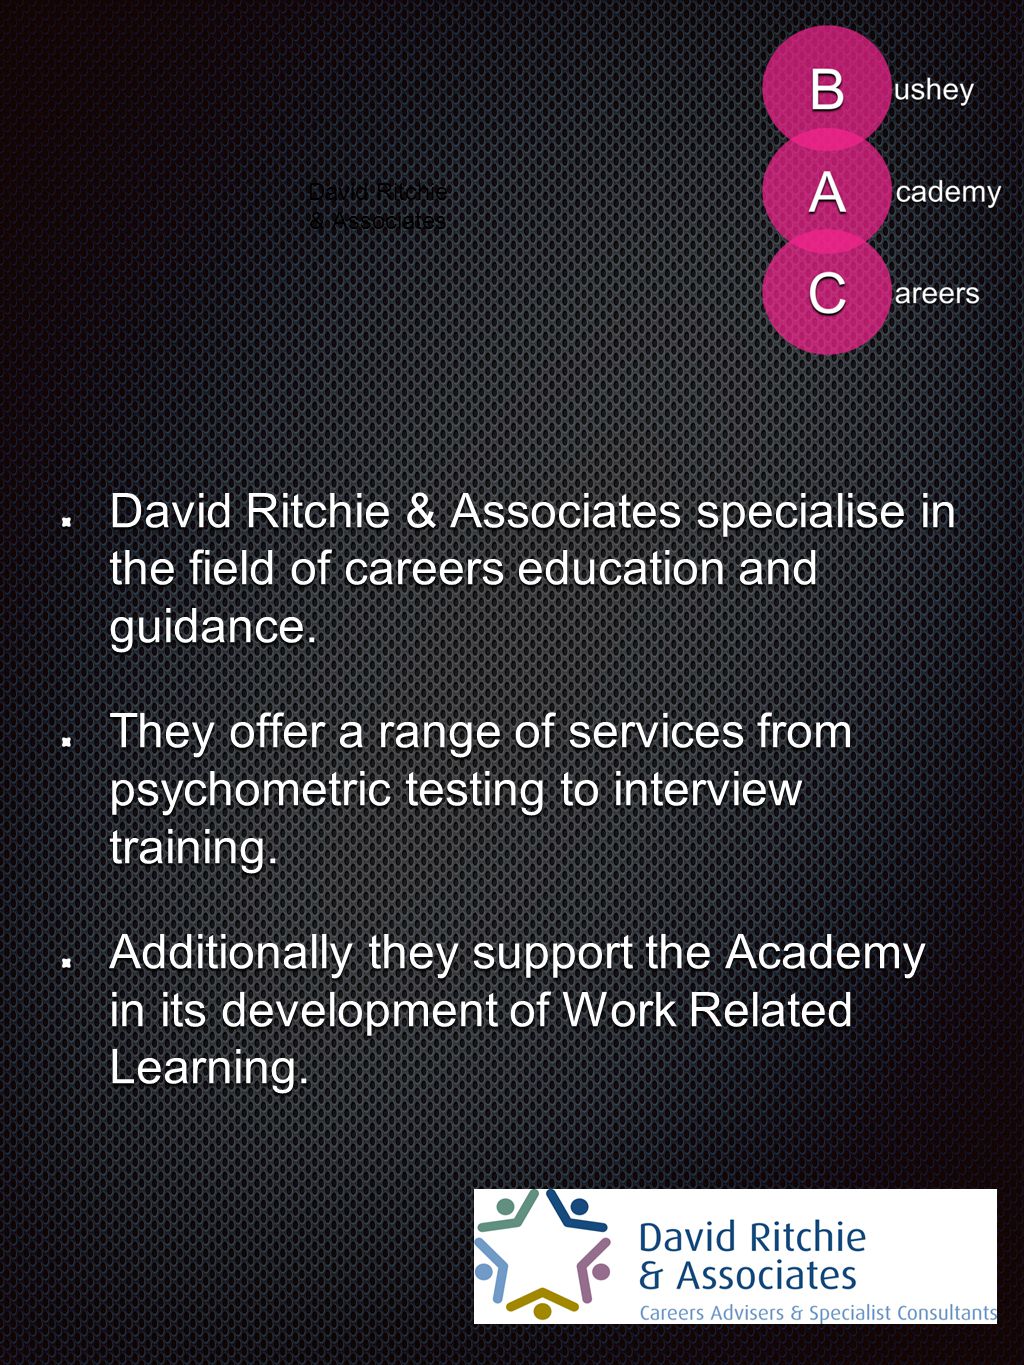 David Ritchie & Associates David Ritchie & Associates specialise in the field of careers education and guidance.